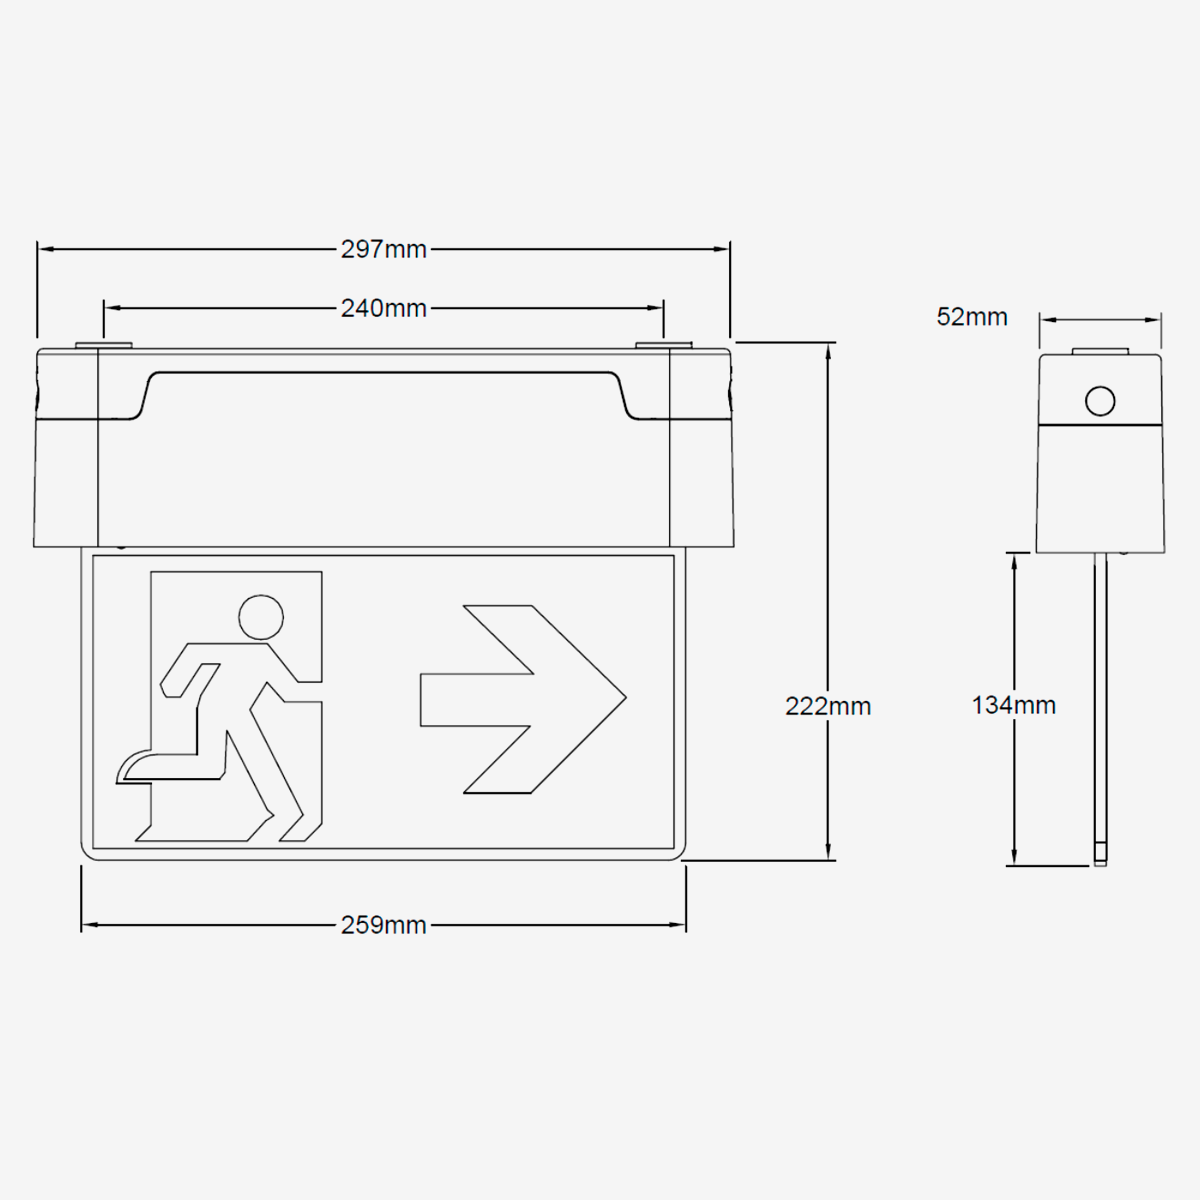 flow exit sign surface technical drawing